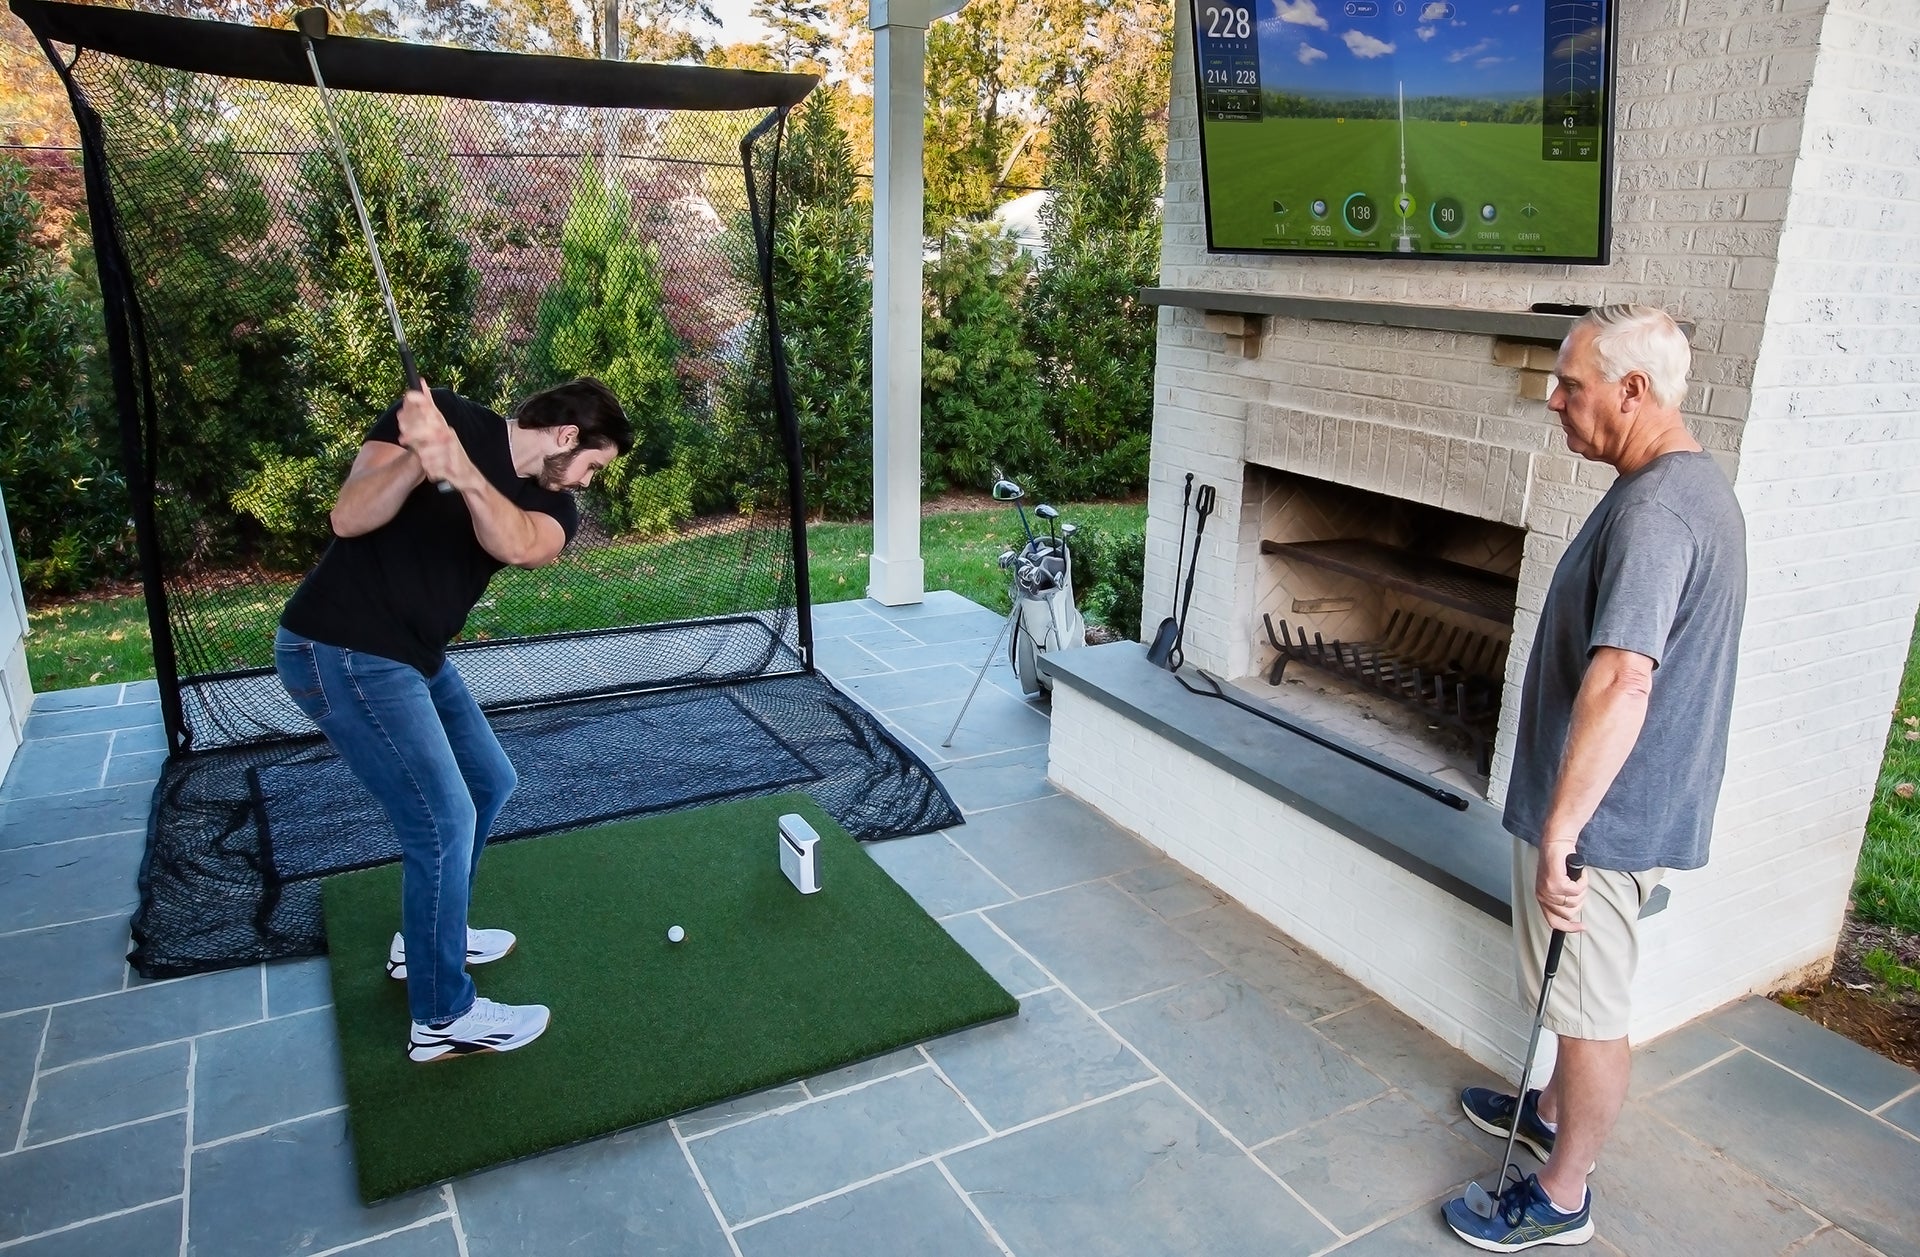 9 Affordable Golf Launch Monitors for Home Use in 2023